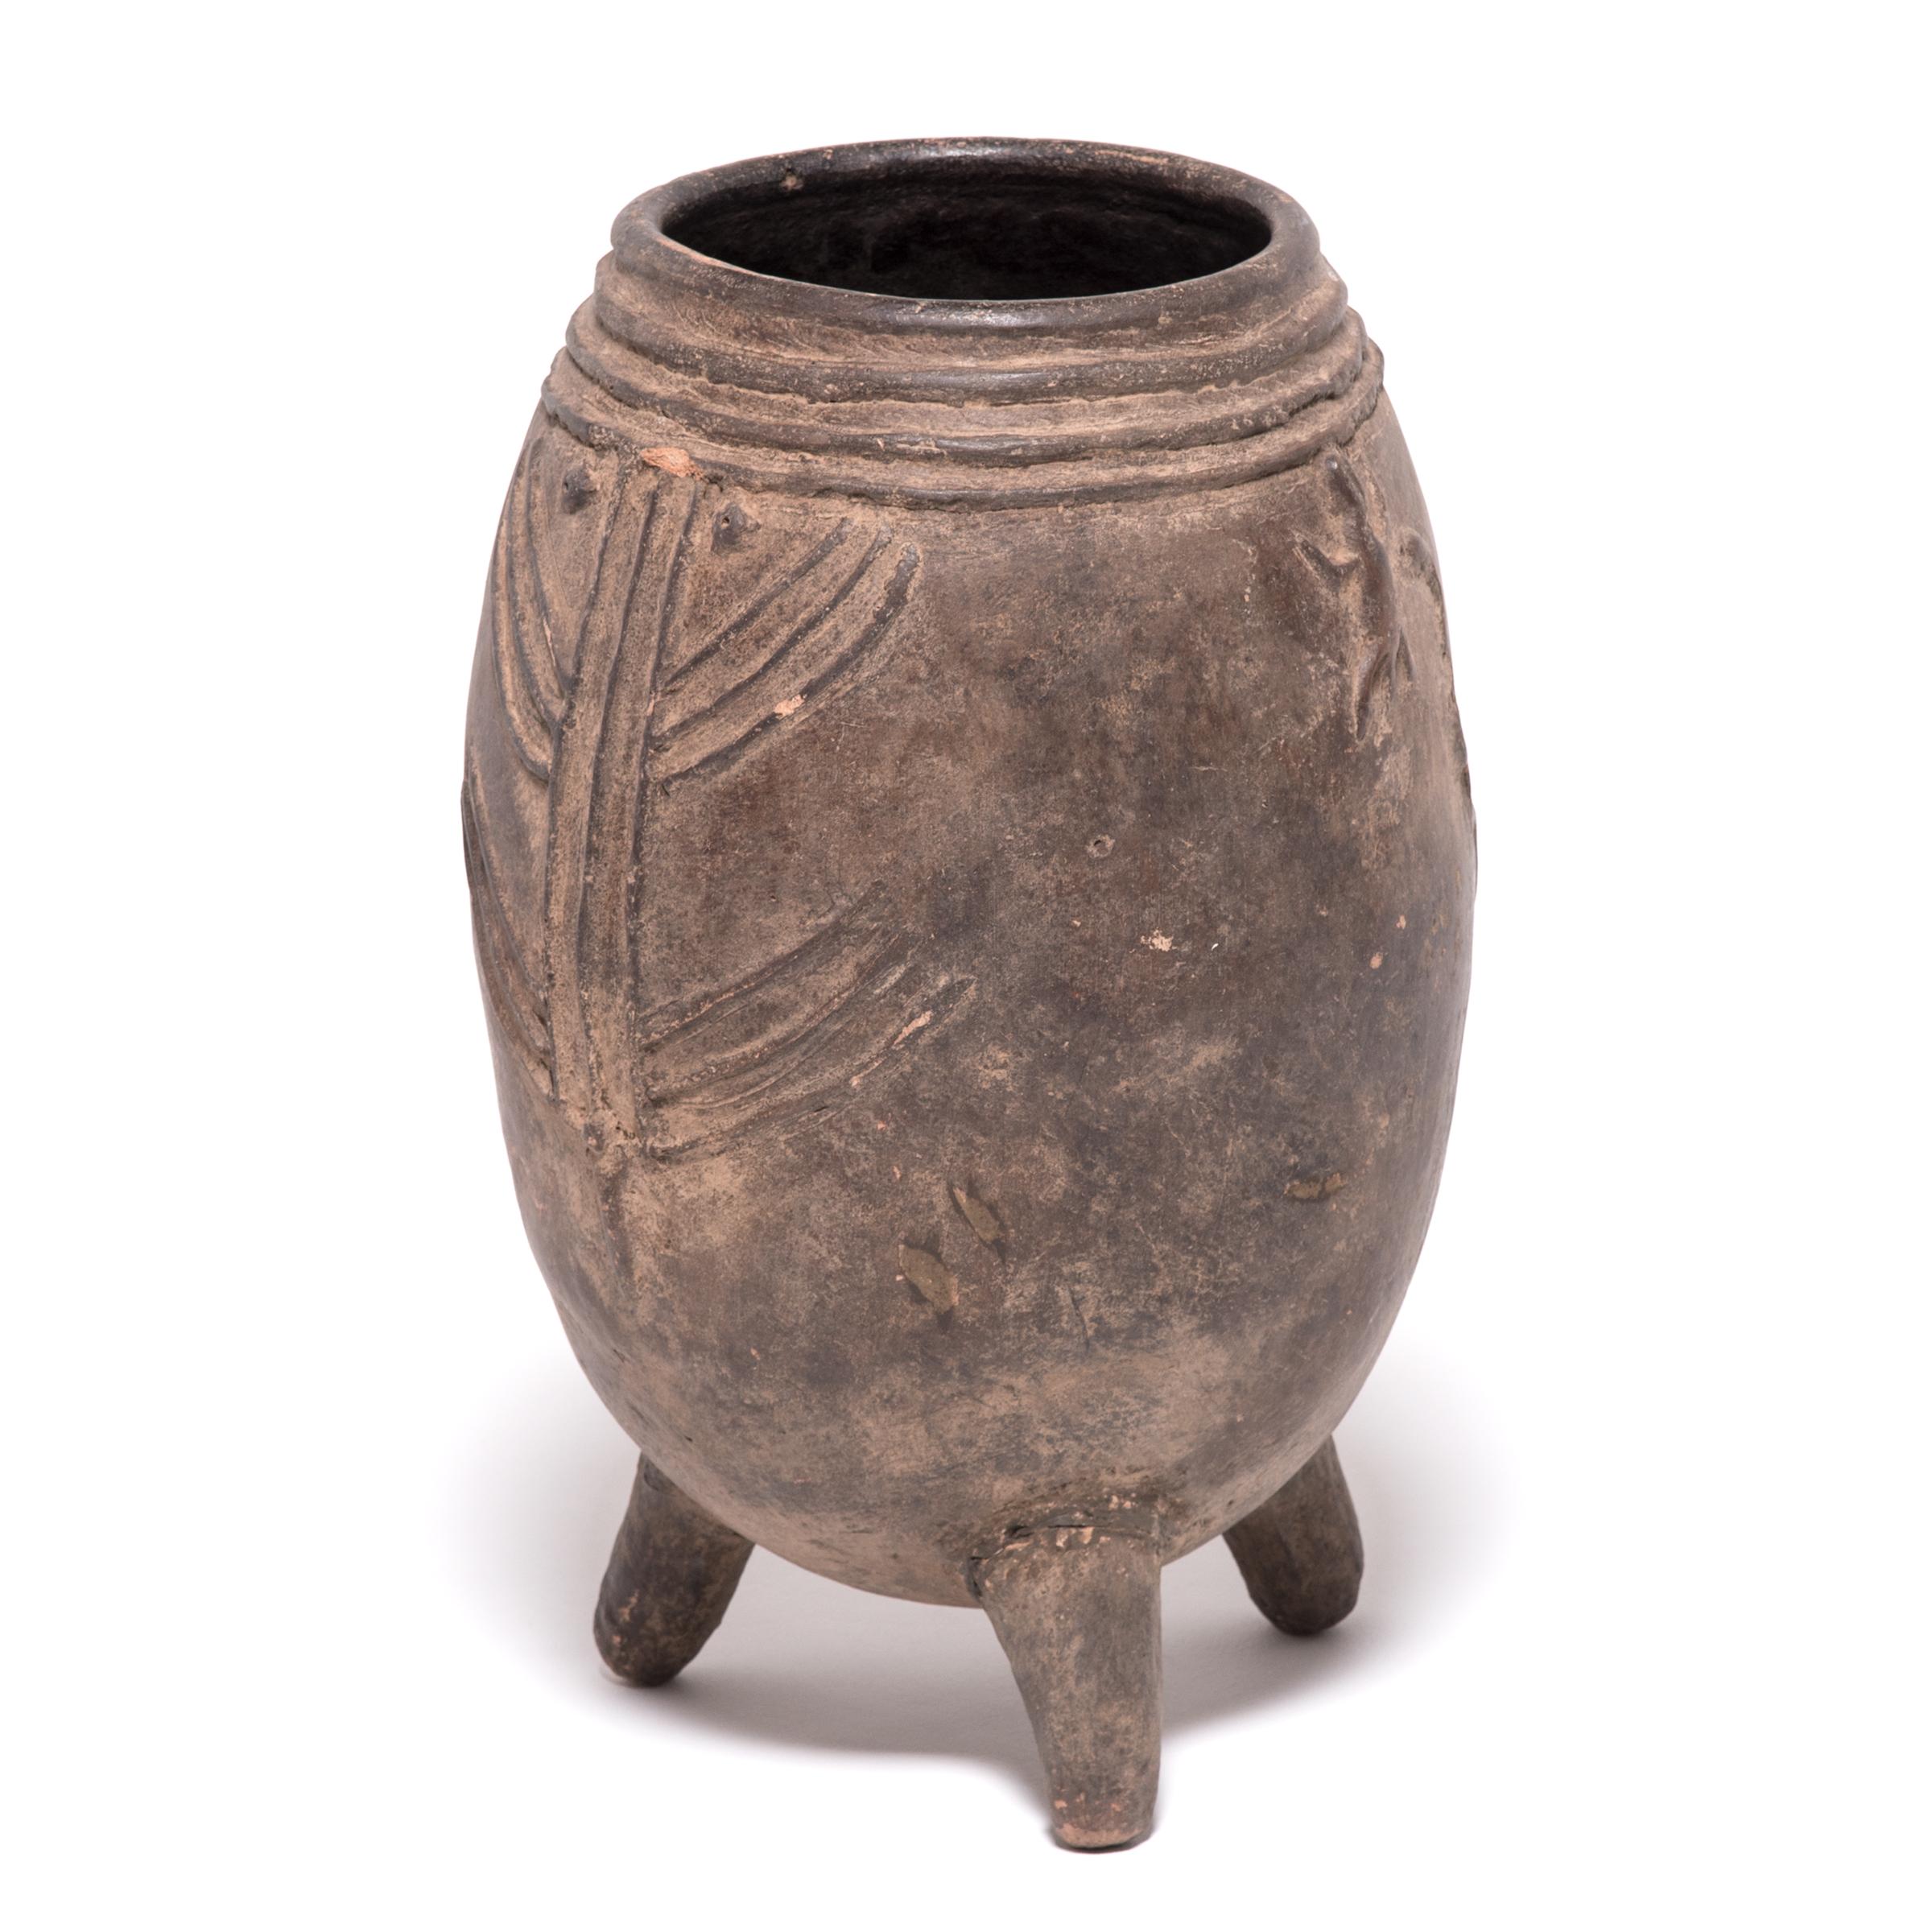 This three footed pot was used to store the millet and grains that fed the Kurumba peoples of Mali. It would have been common to keep up to a dozen unique jars in a typical home. The subtle yet fantastic surface decoration was applied before firing